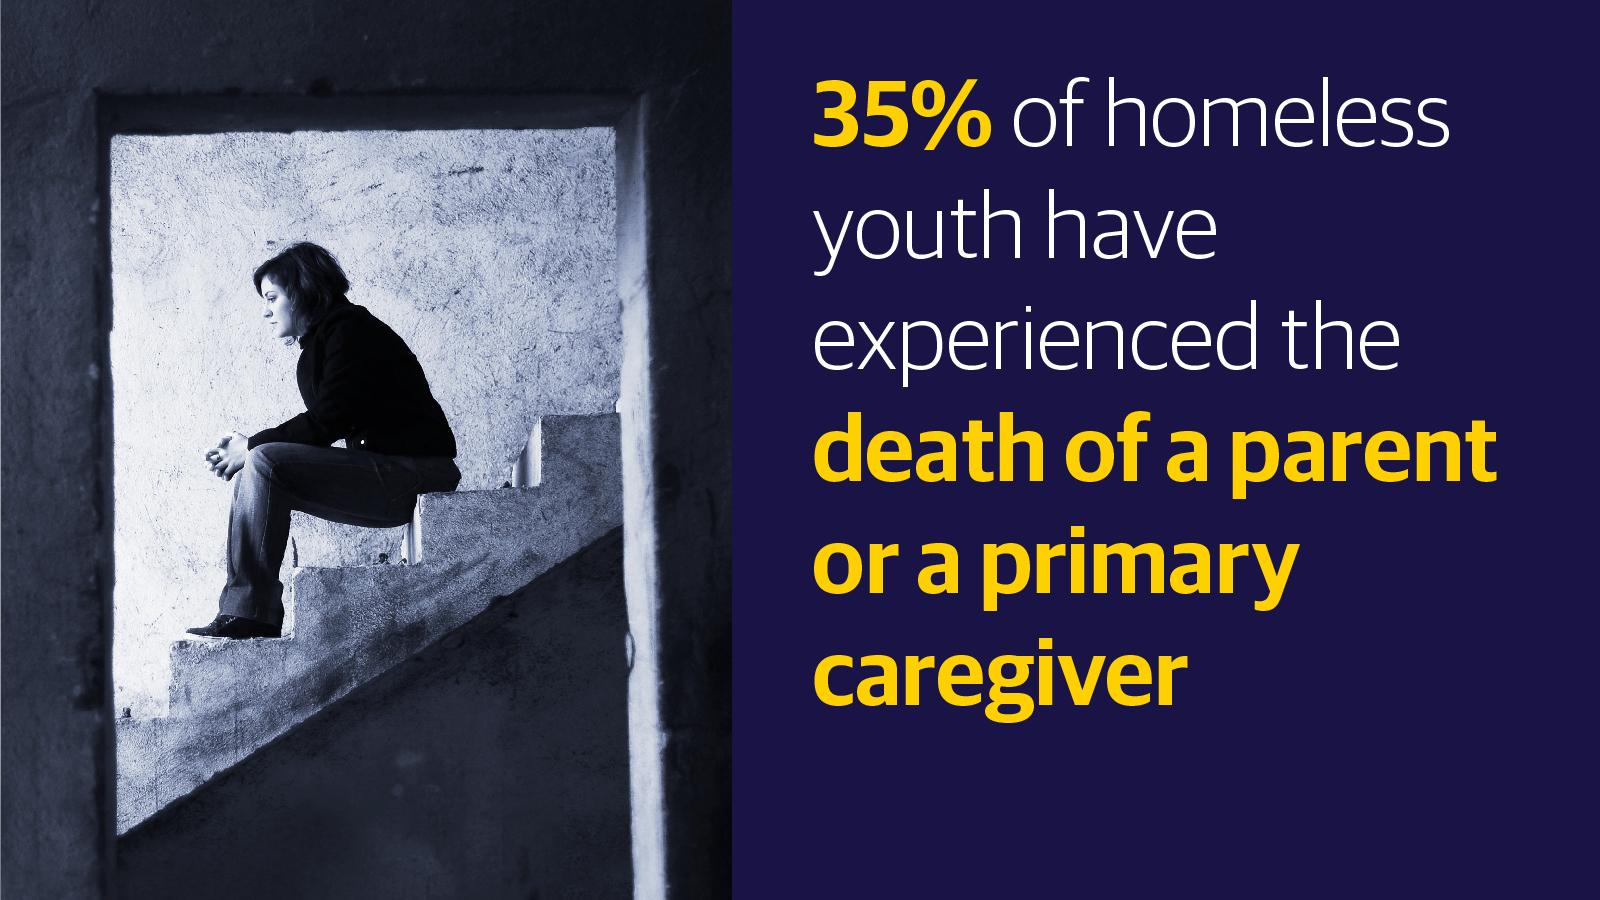 (slide 4 of 9) 35% of homeless youth have experienced the death of a parent or a primary caregiver.. 